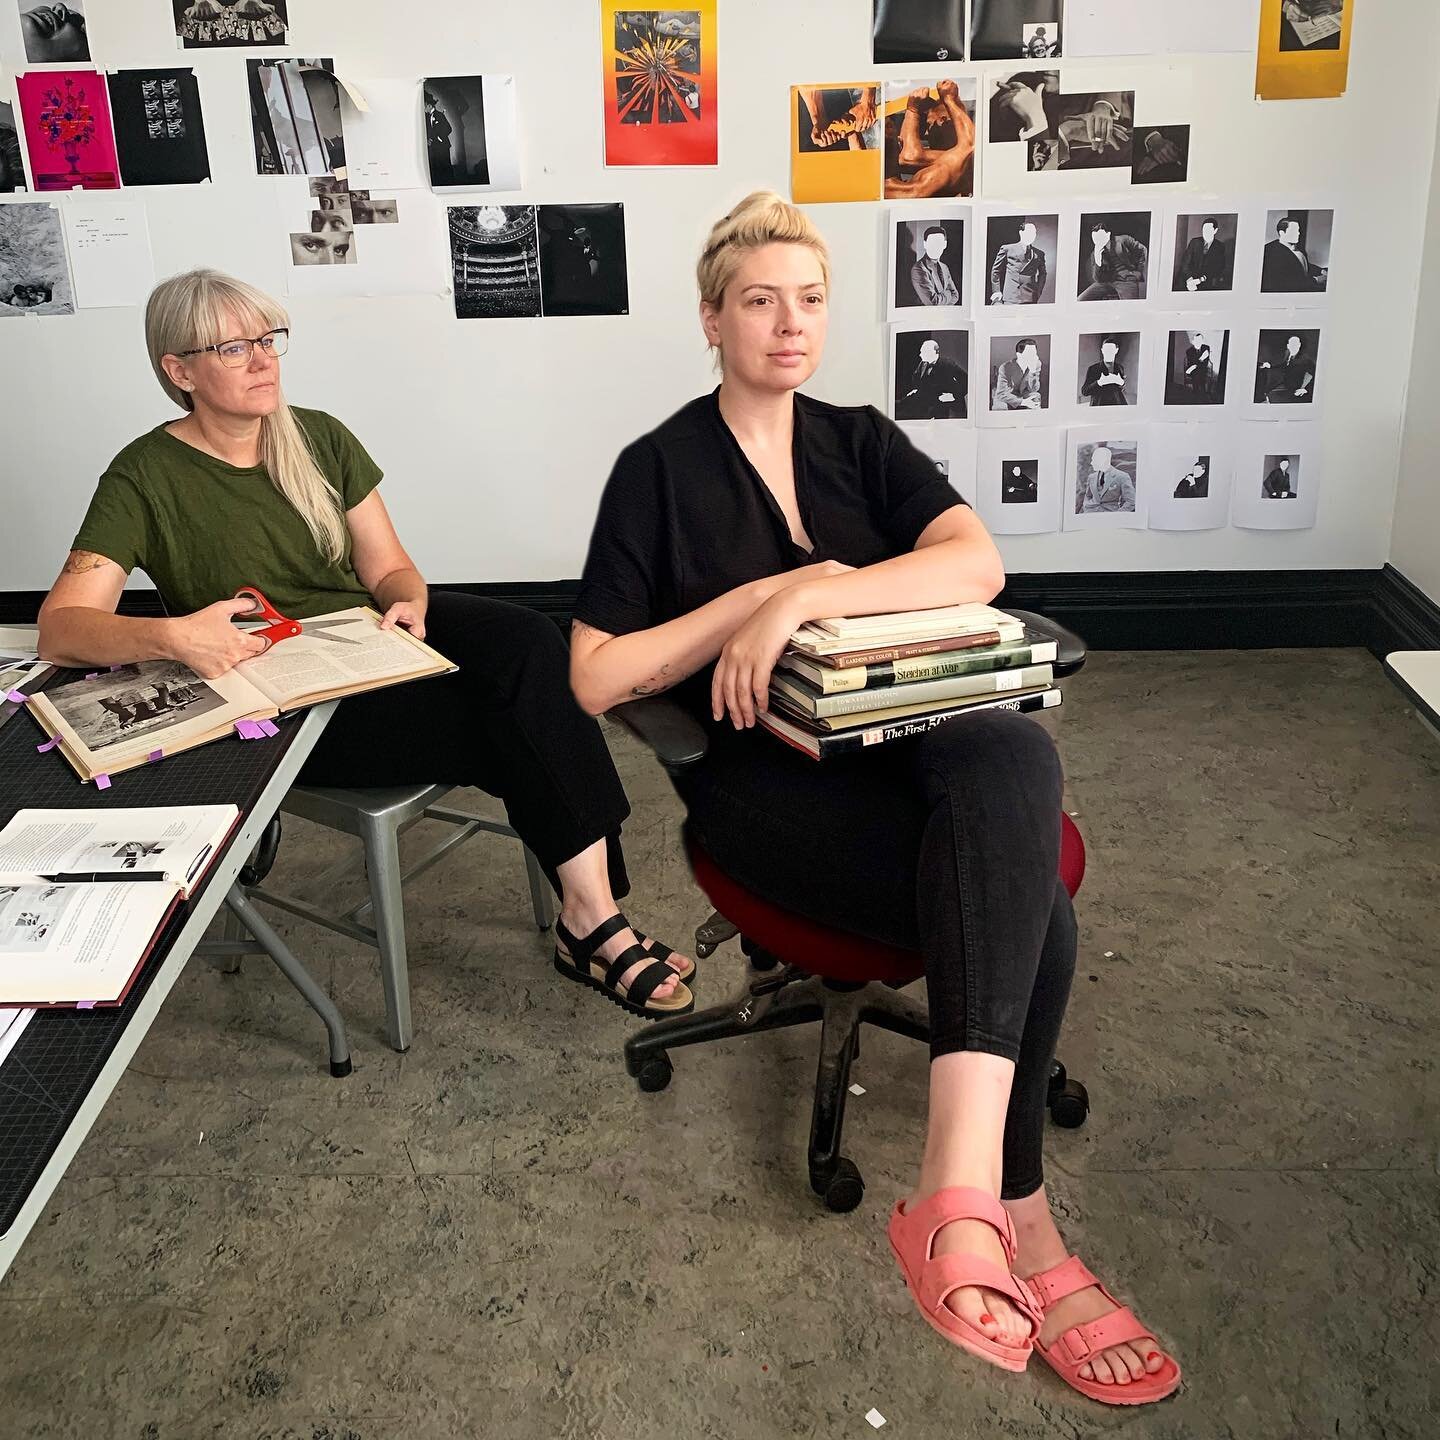 Gazing with Books and Scissors
2022
Visual Studies Workshop

@visualstudiesworkshop
@nattynattynatnatnat 
@kelli_connell